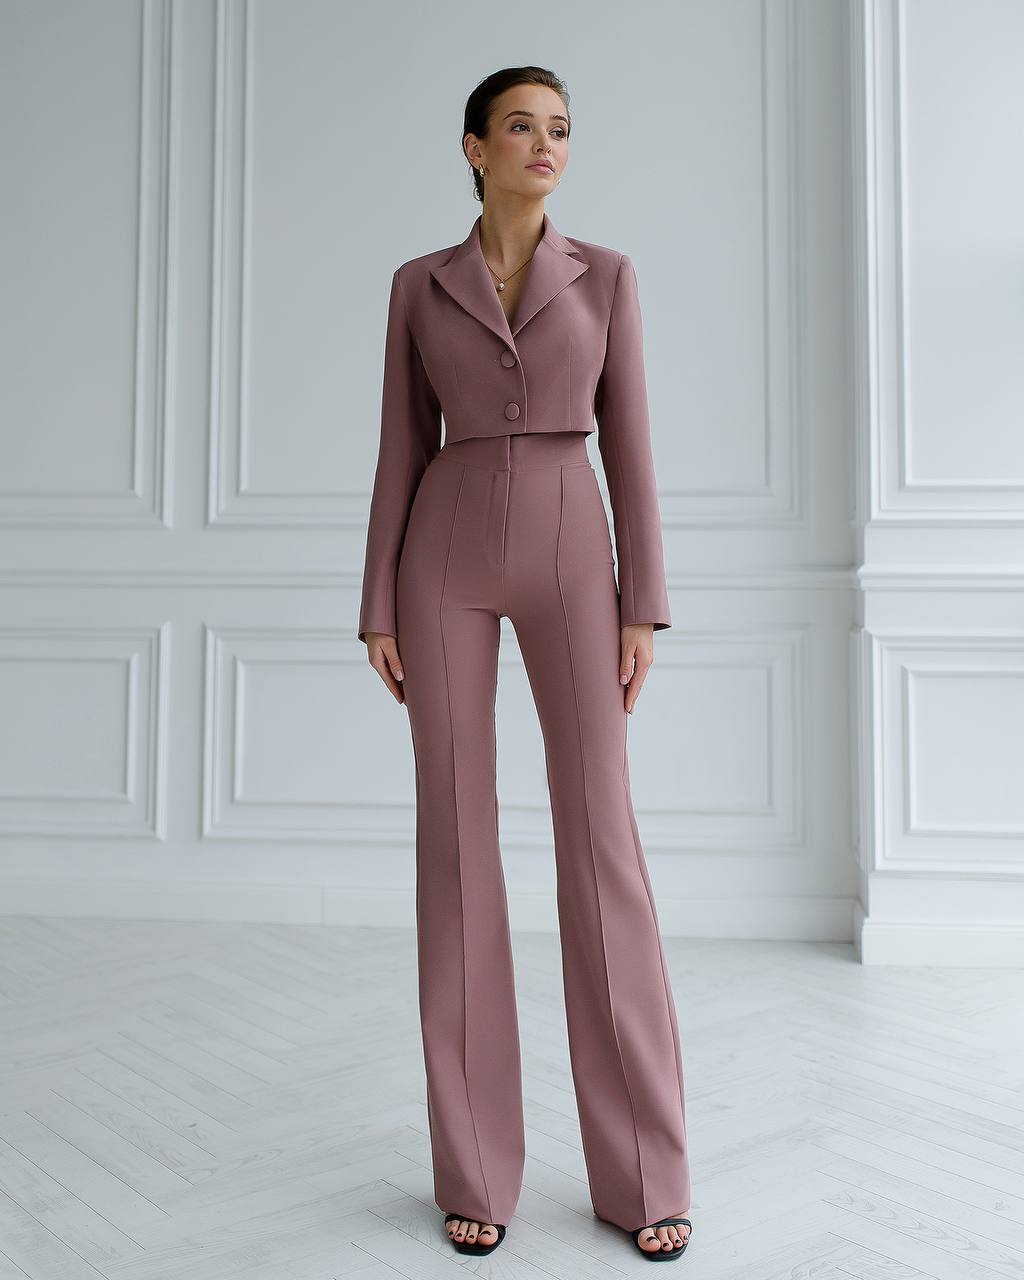 a woman in a pink suit stands in a white room